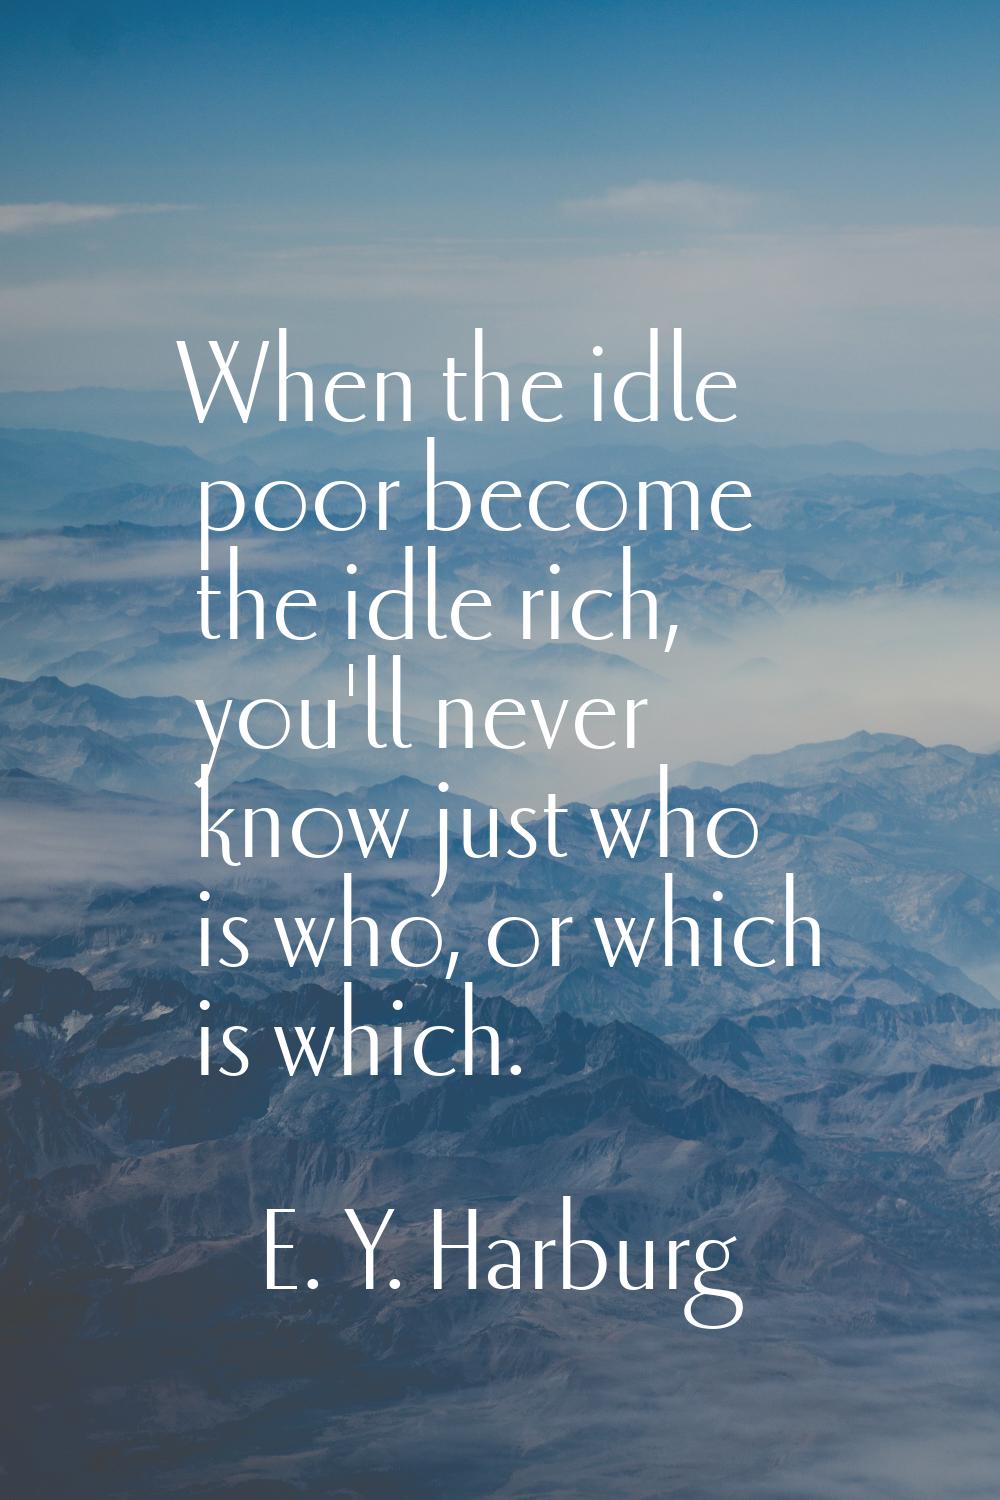 When the idle poor become the idle rich, you'll never know just who is who, or which is which.